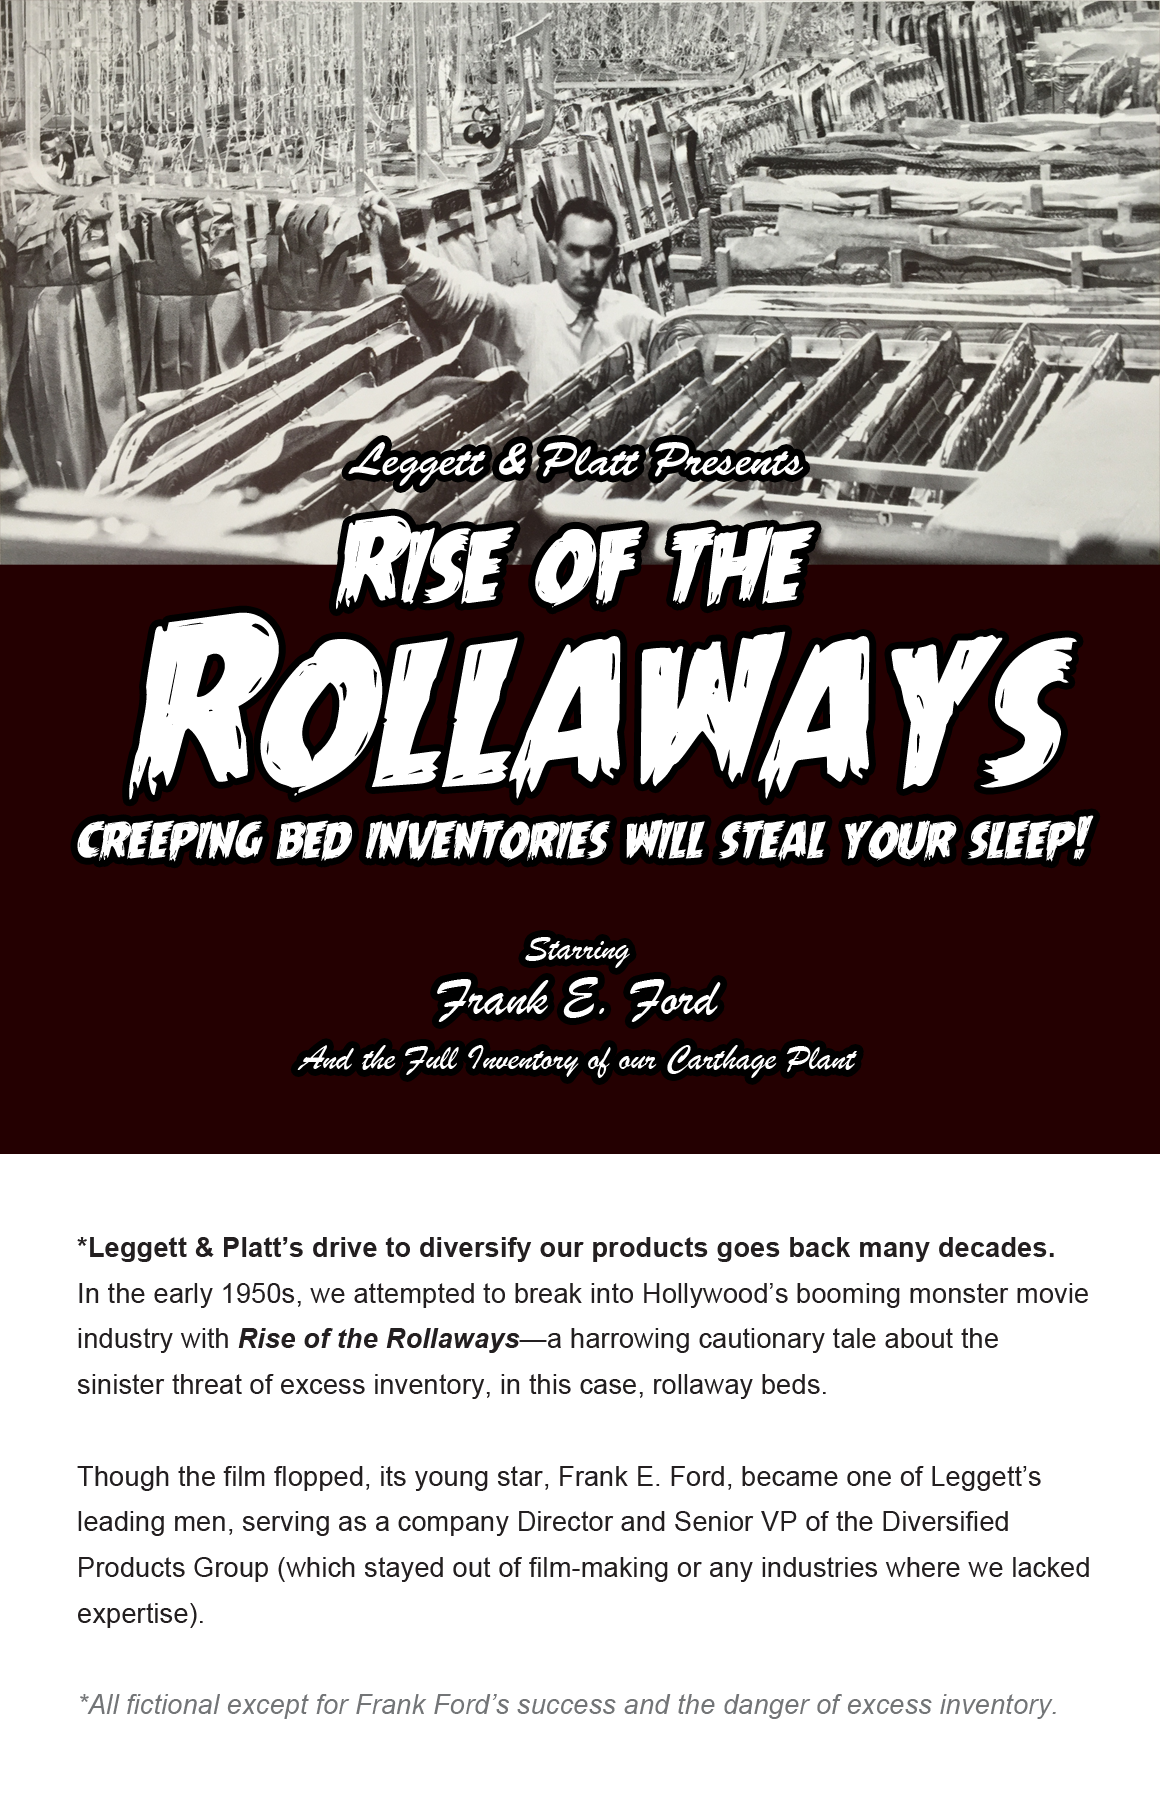 Rise of the Rollaways